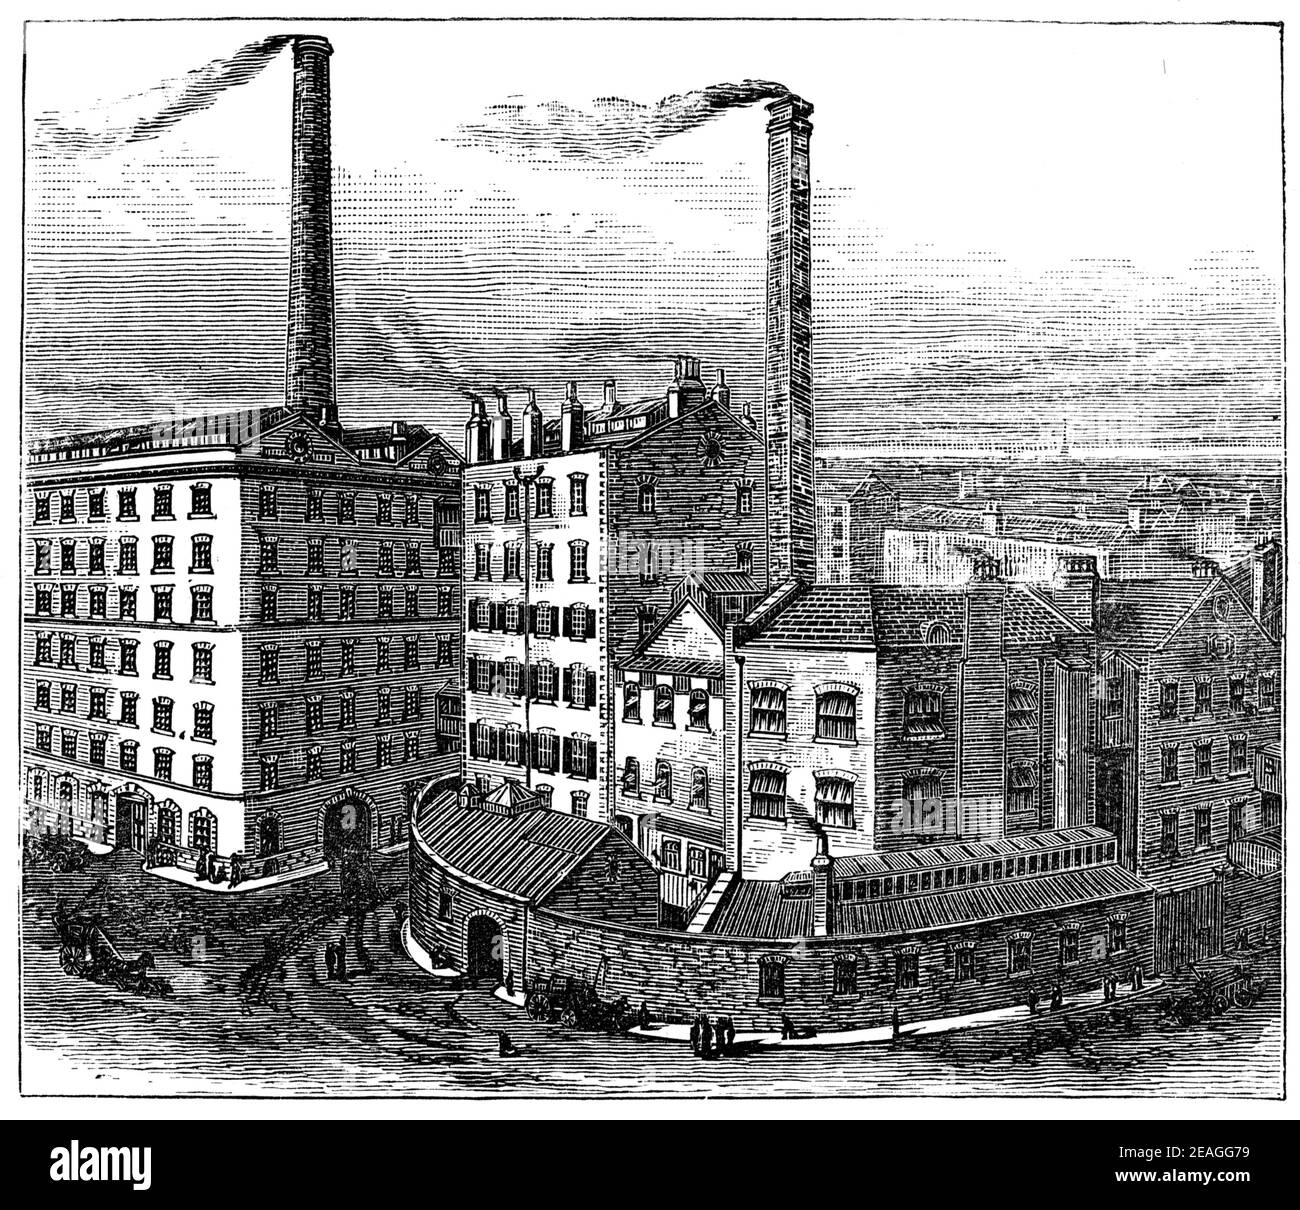 Fry and Sons factory, Nelson Street, Bristol, 1882 J. S. Fry & Sons, Ltd. better known as Fry's, British chocolate company owned by Joseph Storrs Fry and his family. Stock Photo